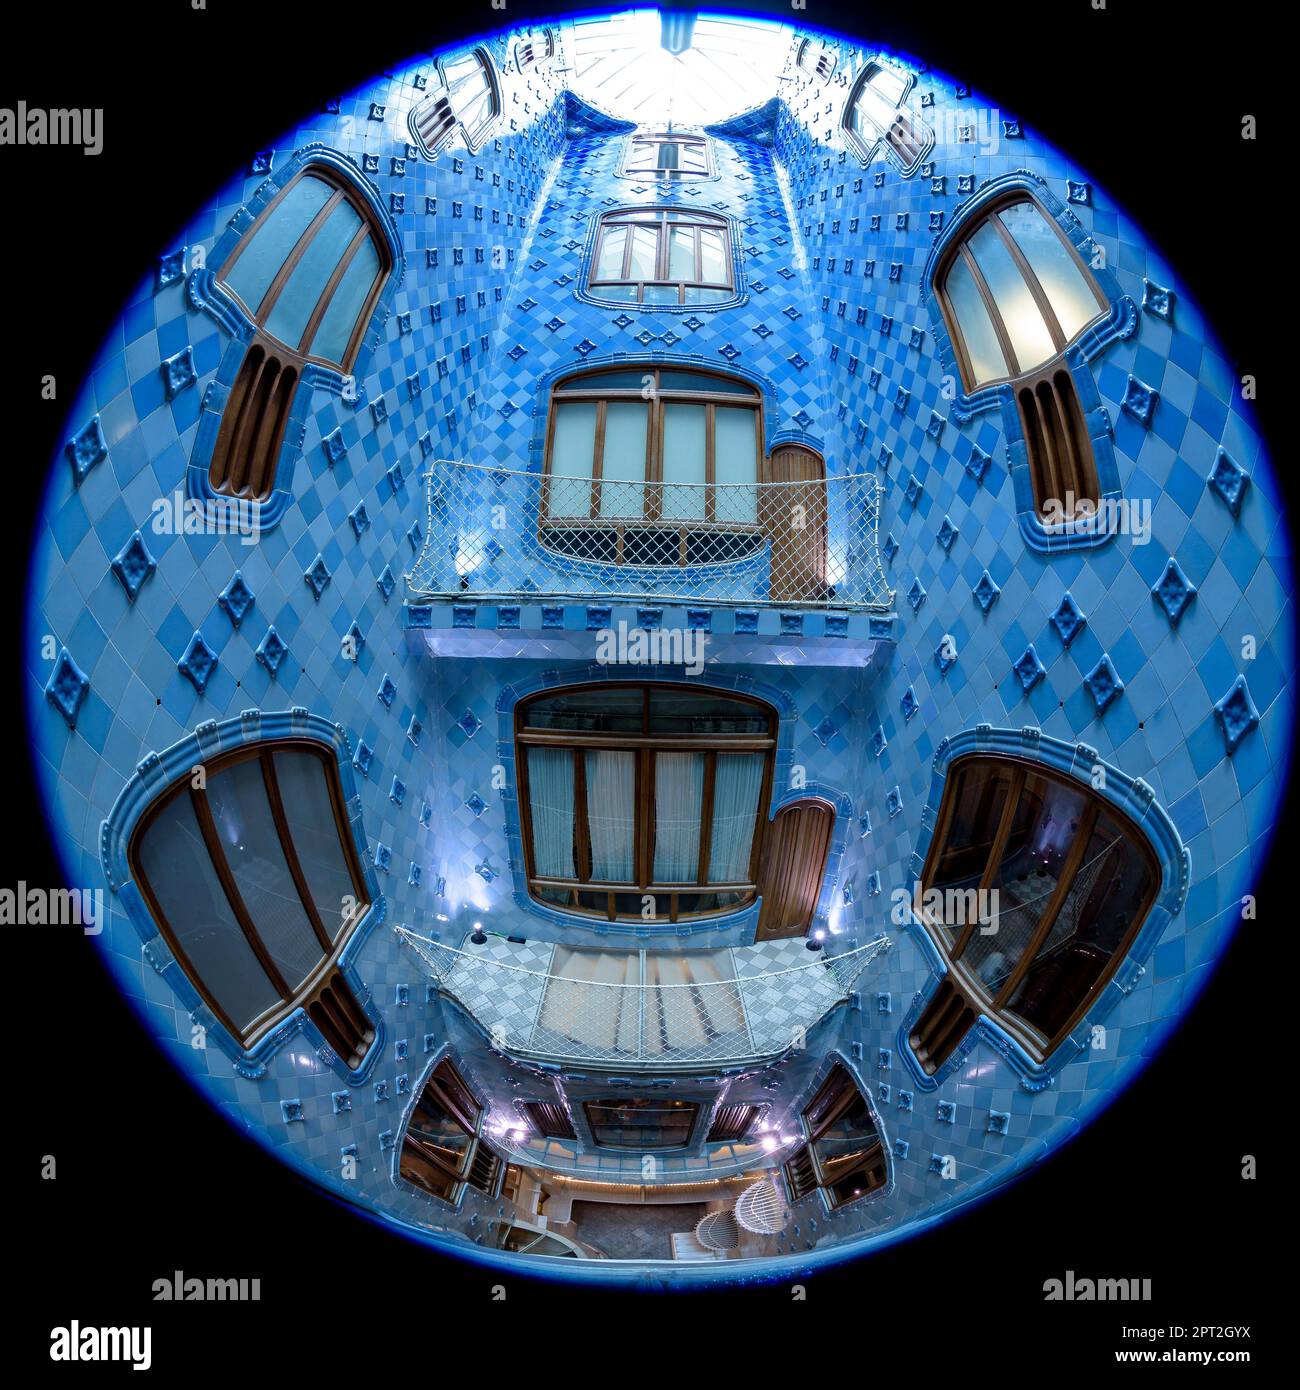 Fisheye view of the interior courtyard of Casa Batlló decorated with a gradient mosaic from blue to white designed by Gaudí. Barcelona Catalonia Spain Stock Photo